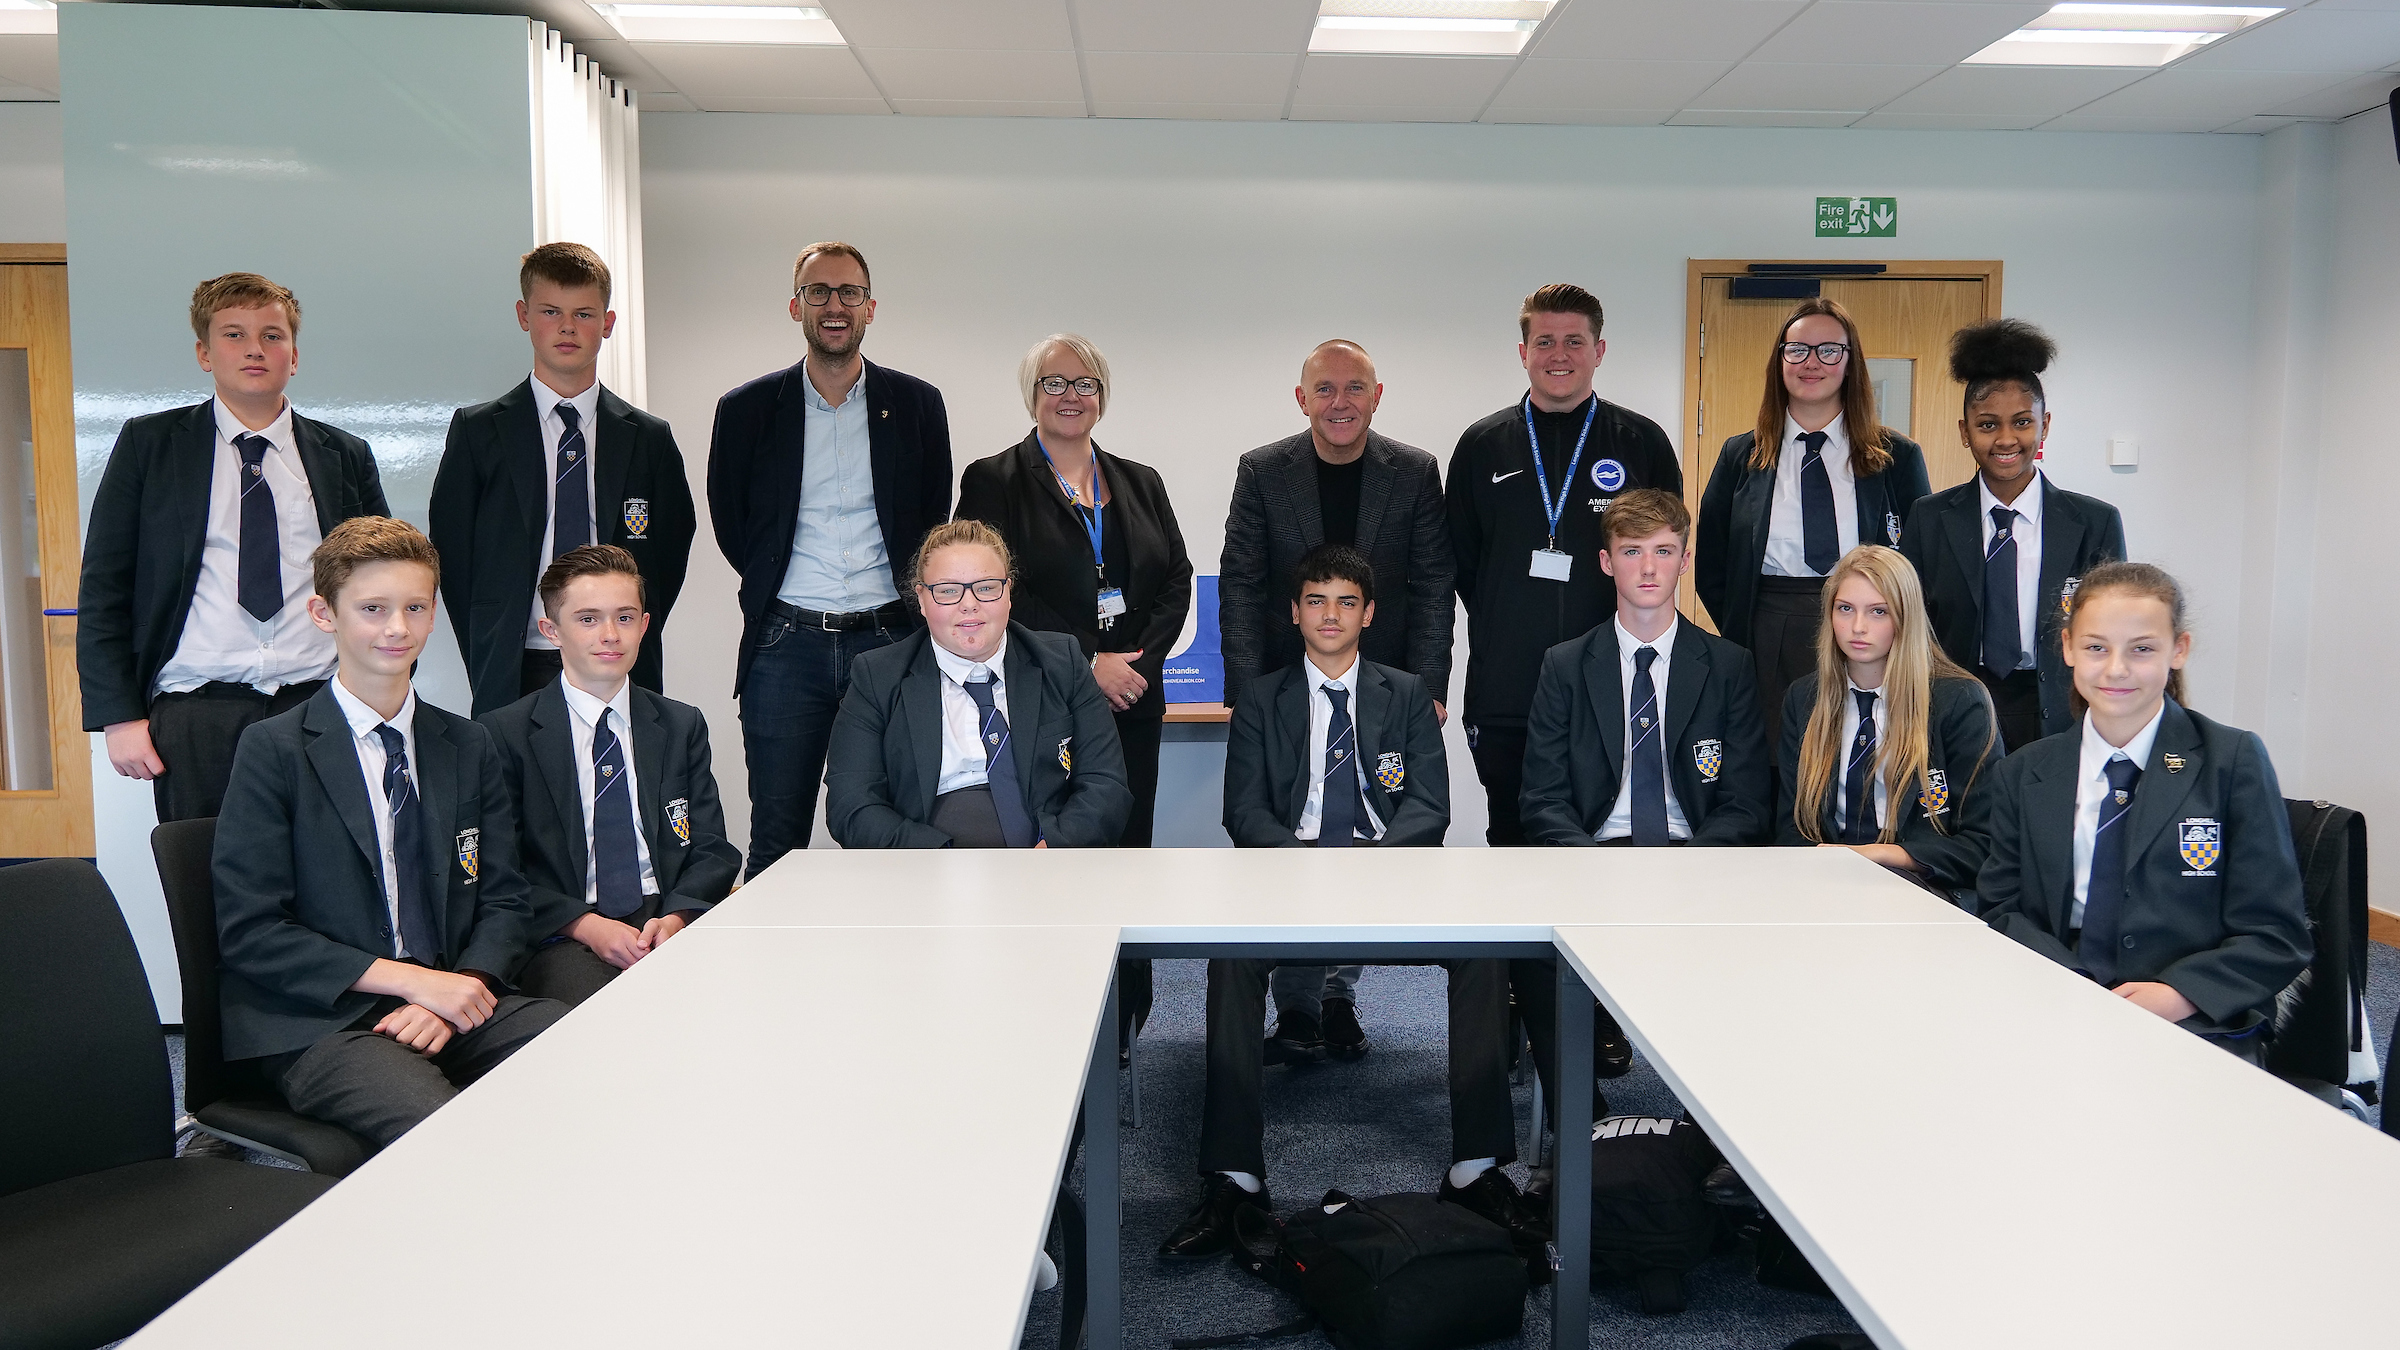 Deputy chairman provides students with insight into the football industry